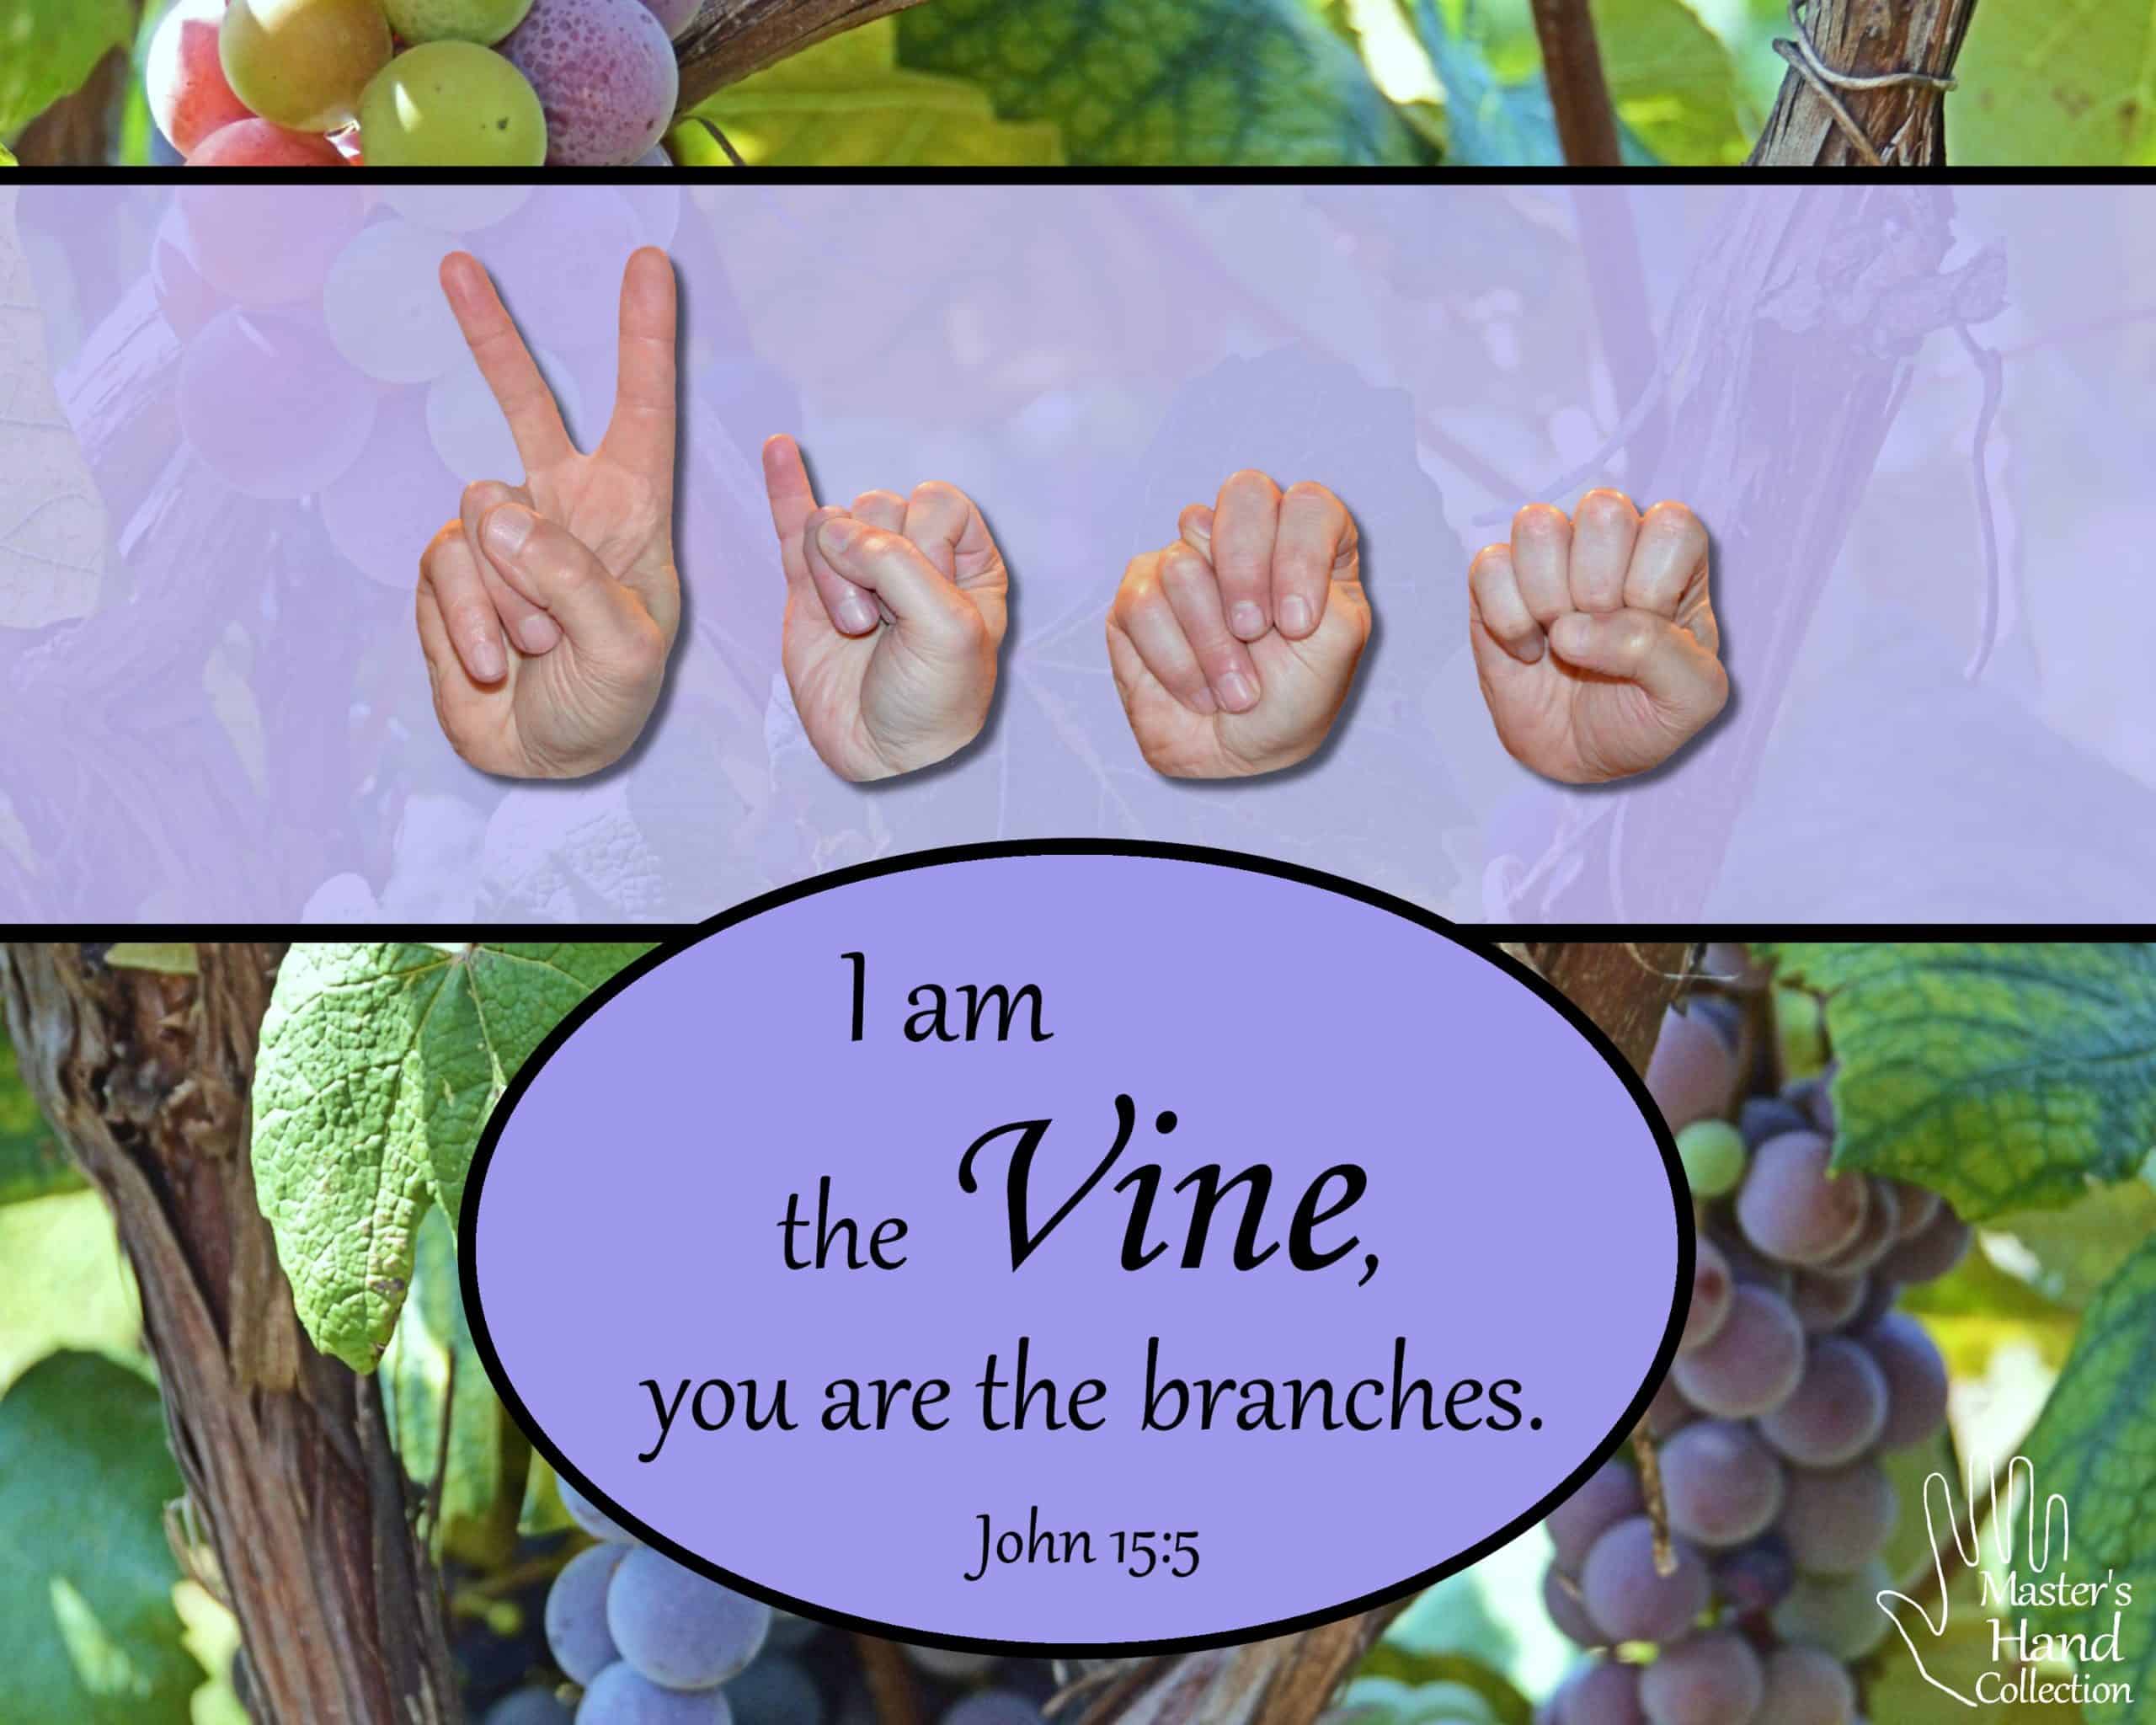 I am the Vine by Master's Hand Collection